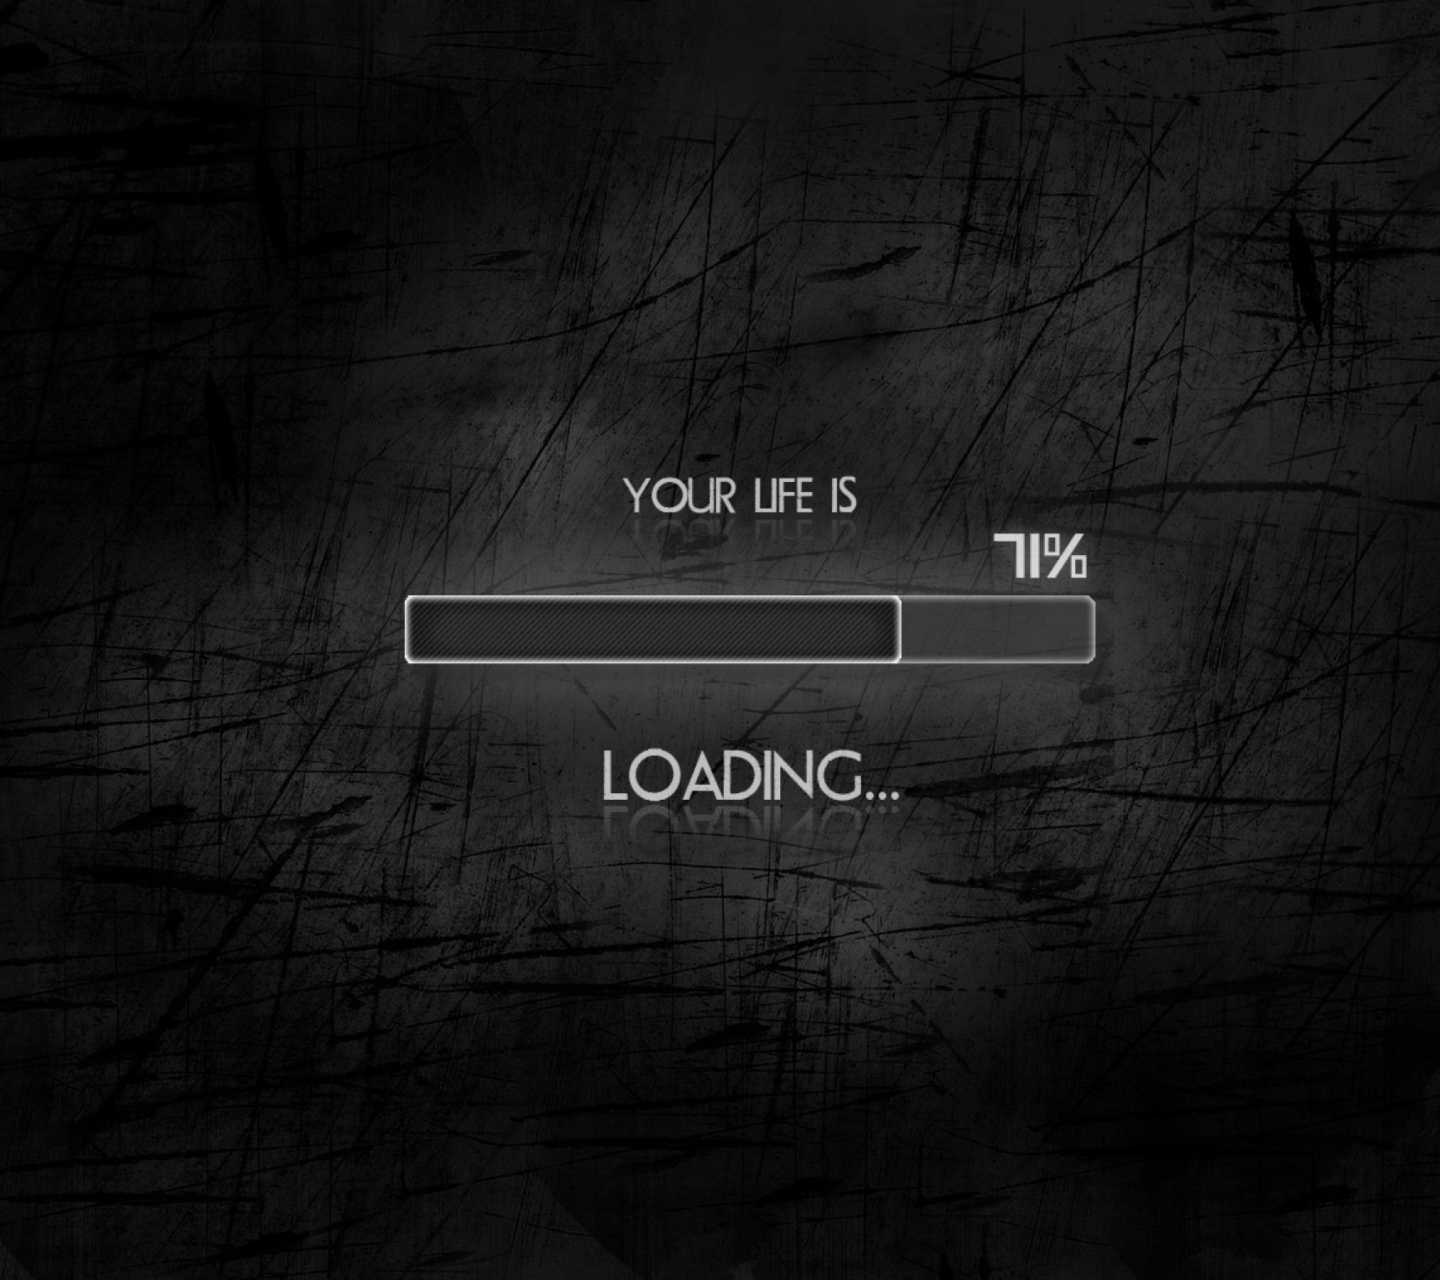 Your Life Is Loading wallpaper 1440x1280